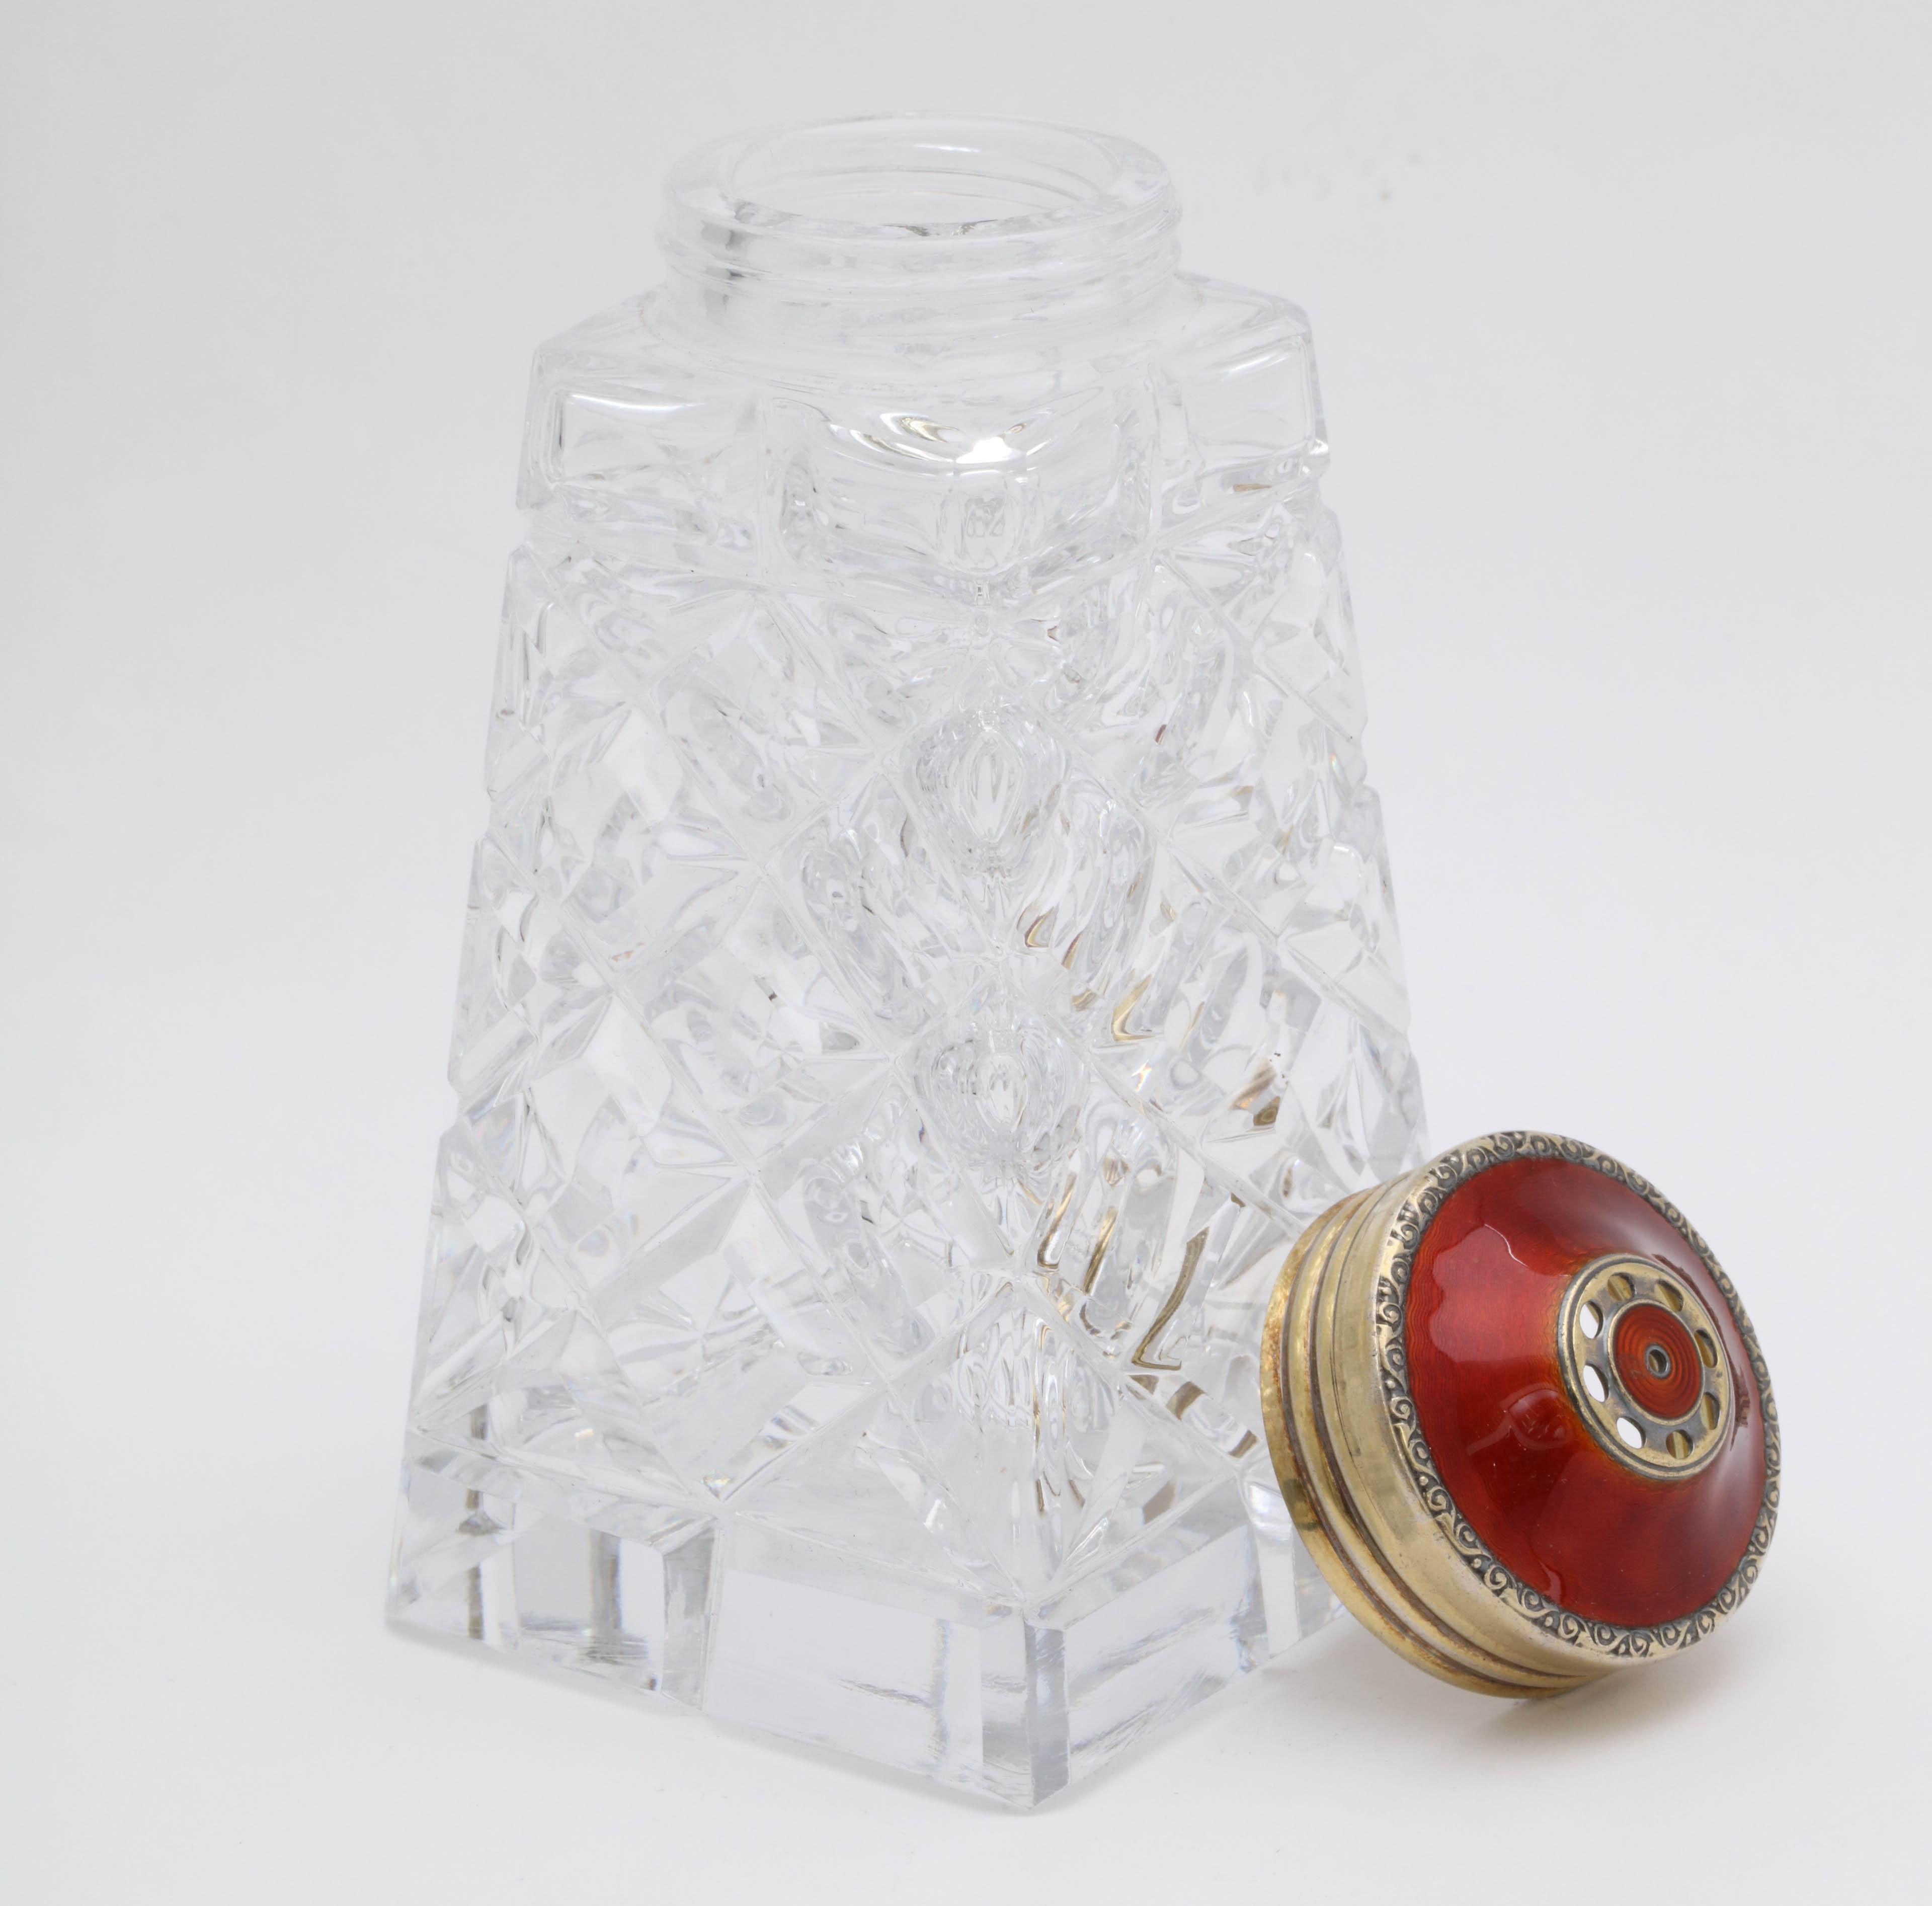 Mid-20th Century Art Deco Sterling Silver-Gilt and Red Guilloche Enamel-Mounted Sugar Shaker